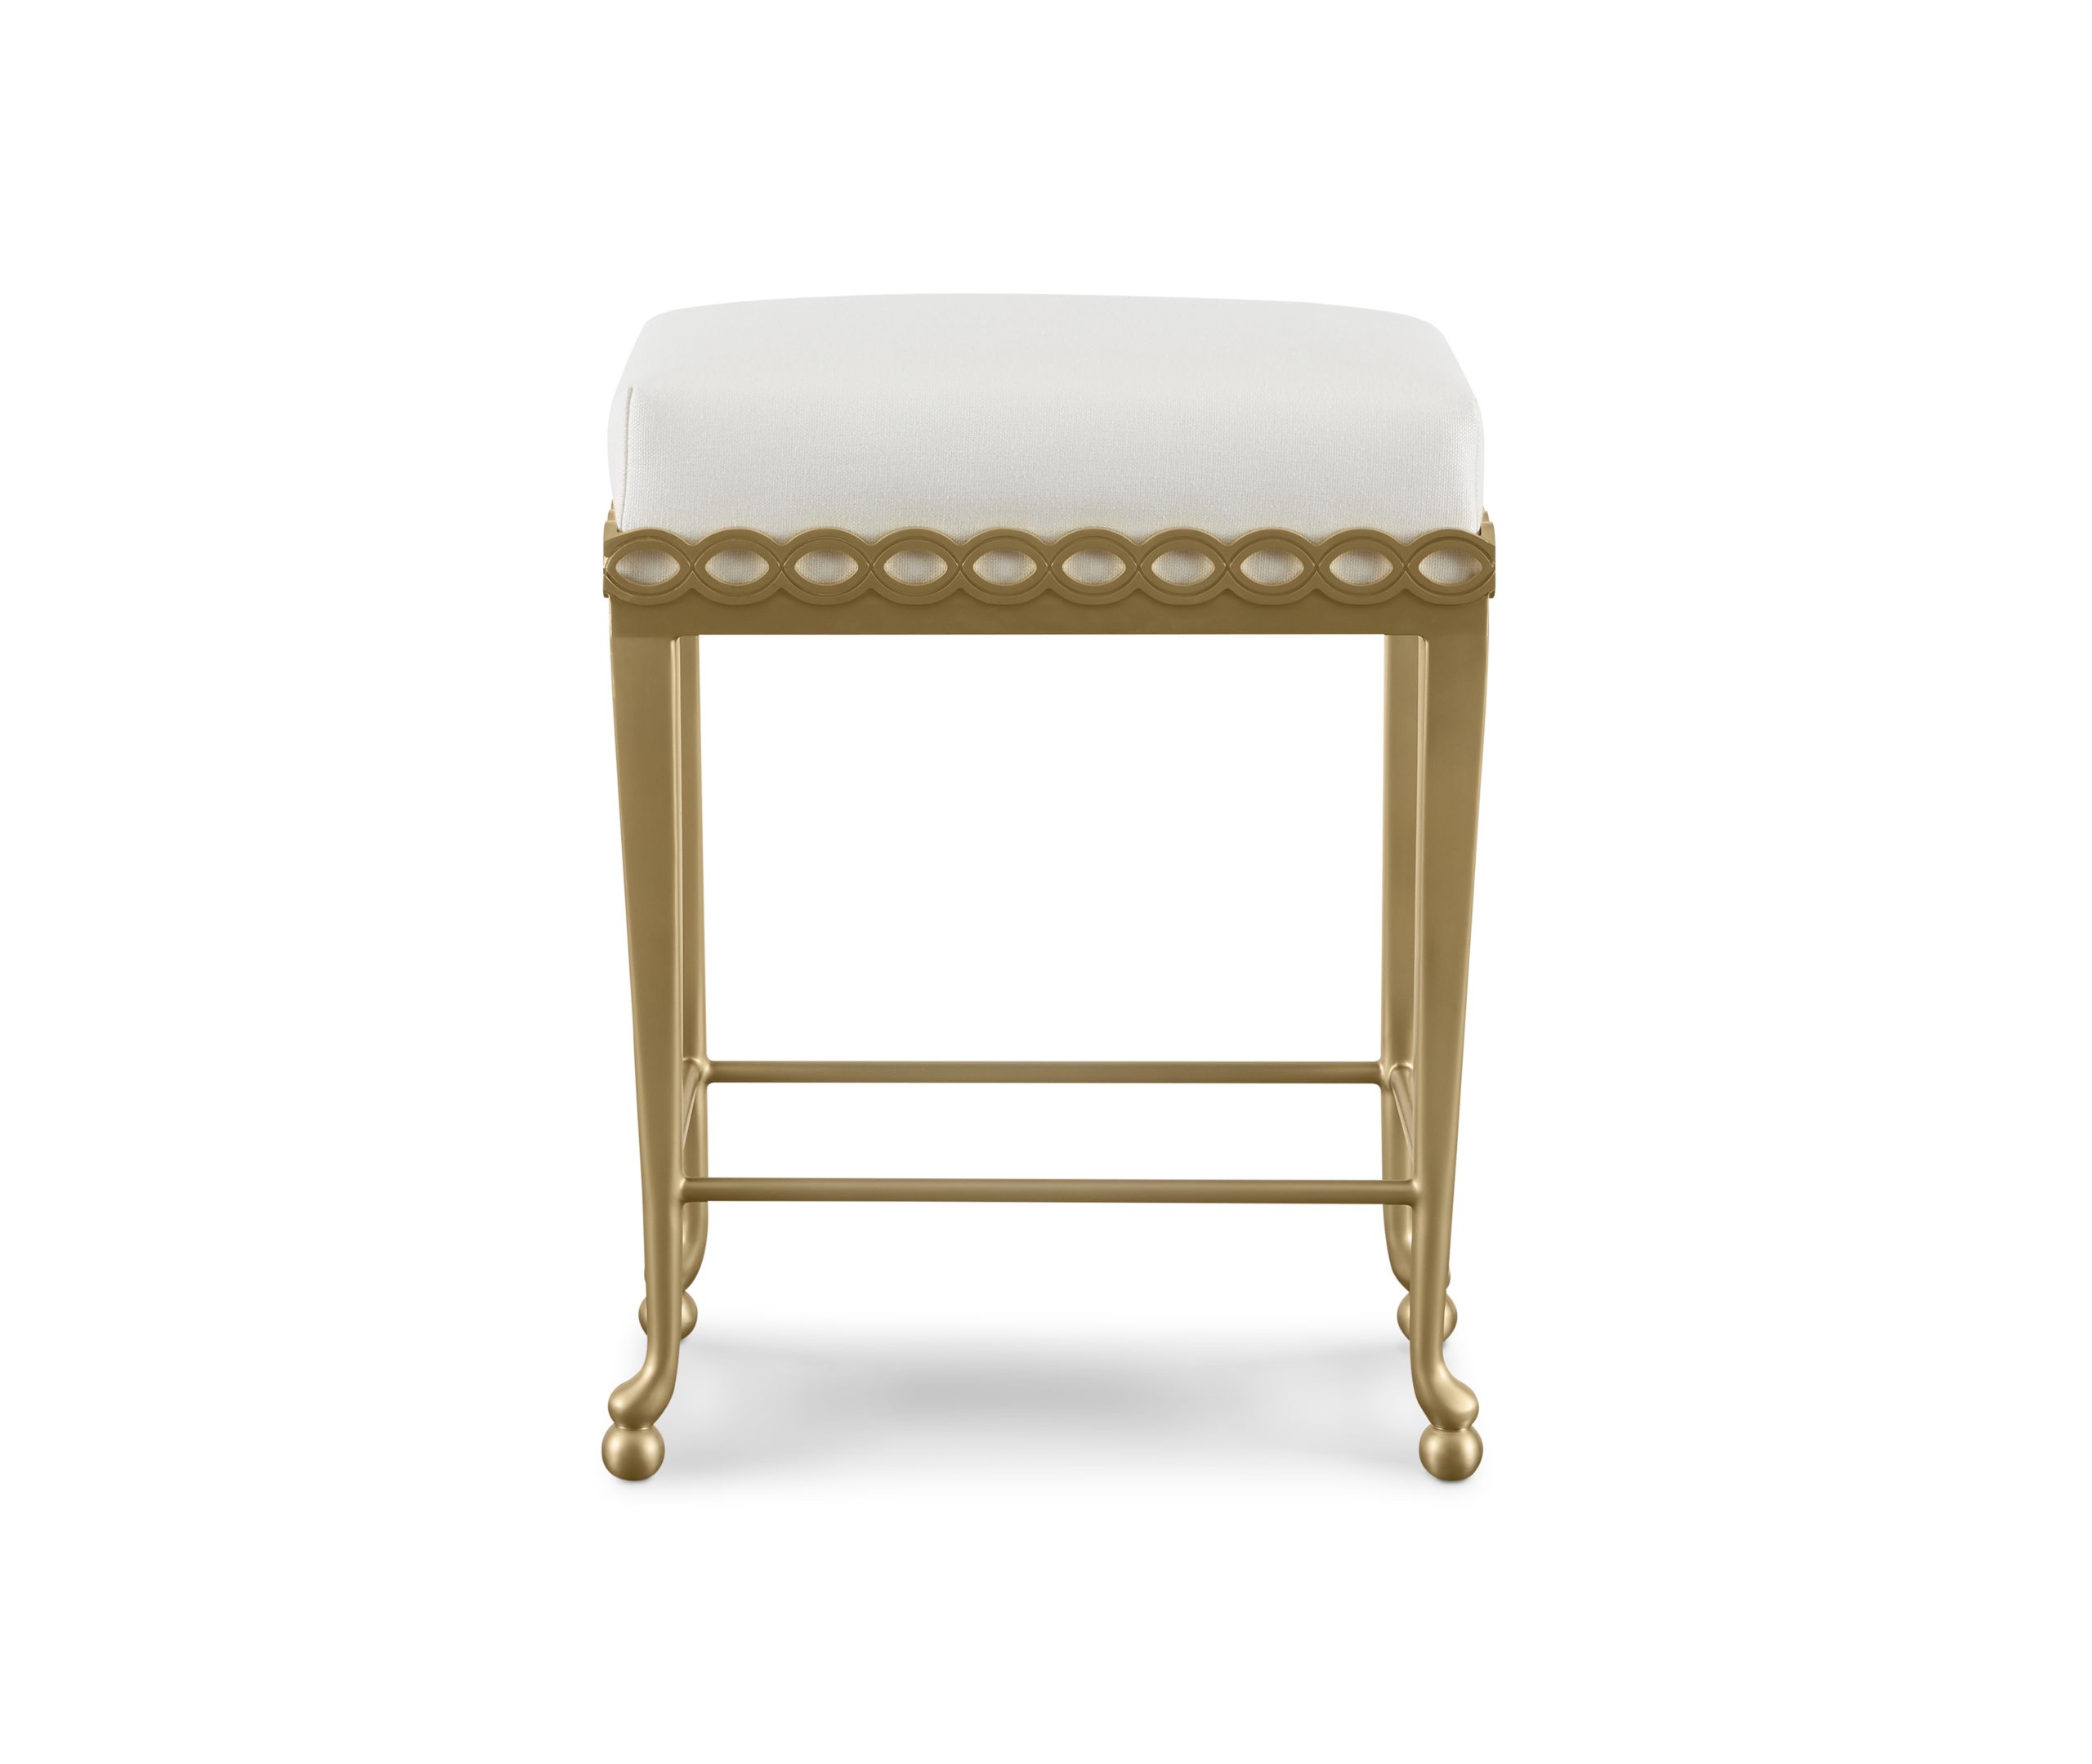 Baker_products_WNWN_infinity_counter_stool_BAA3248_FRONT-scaled-2